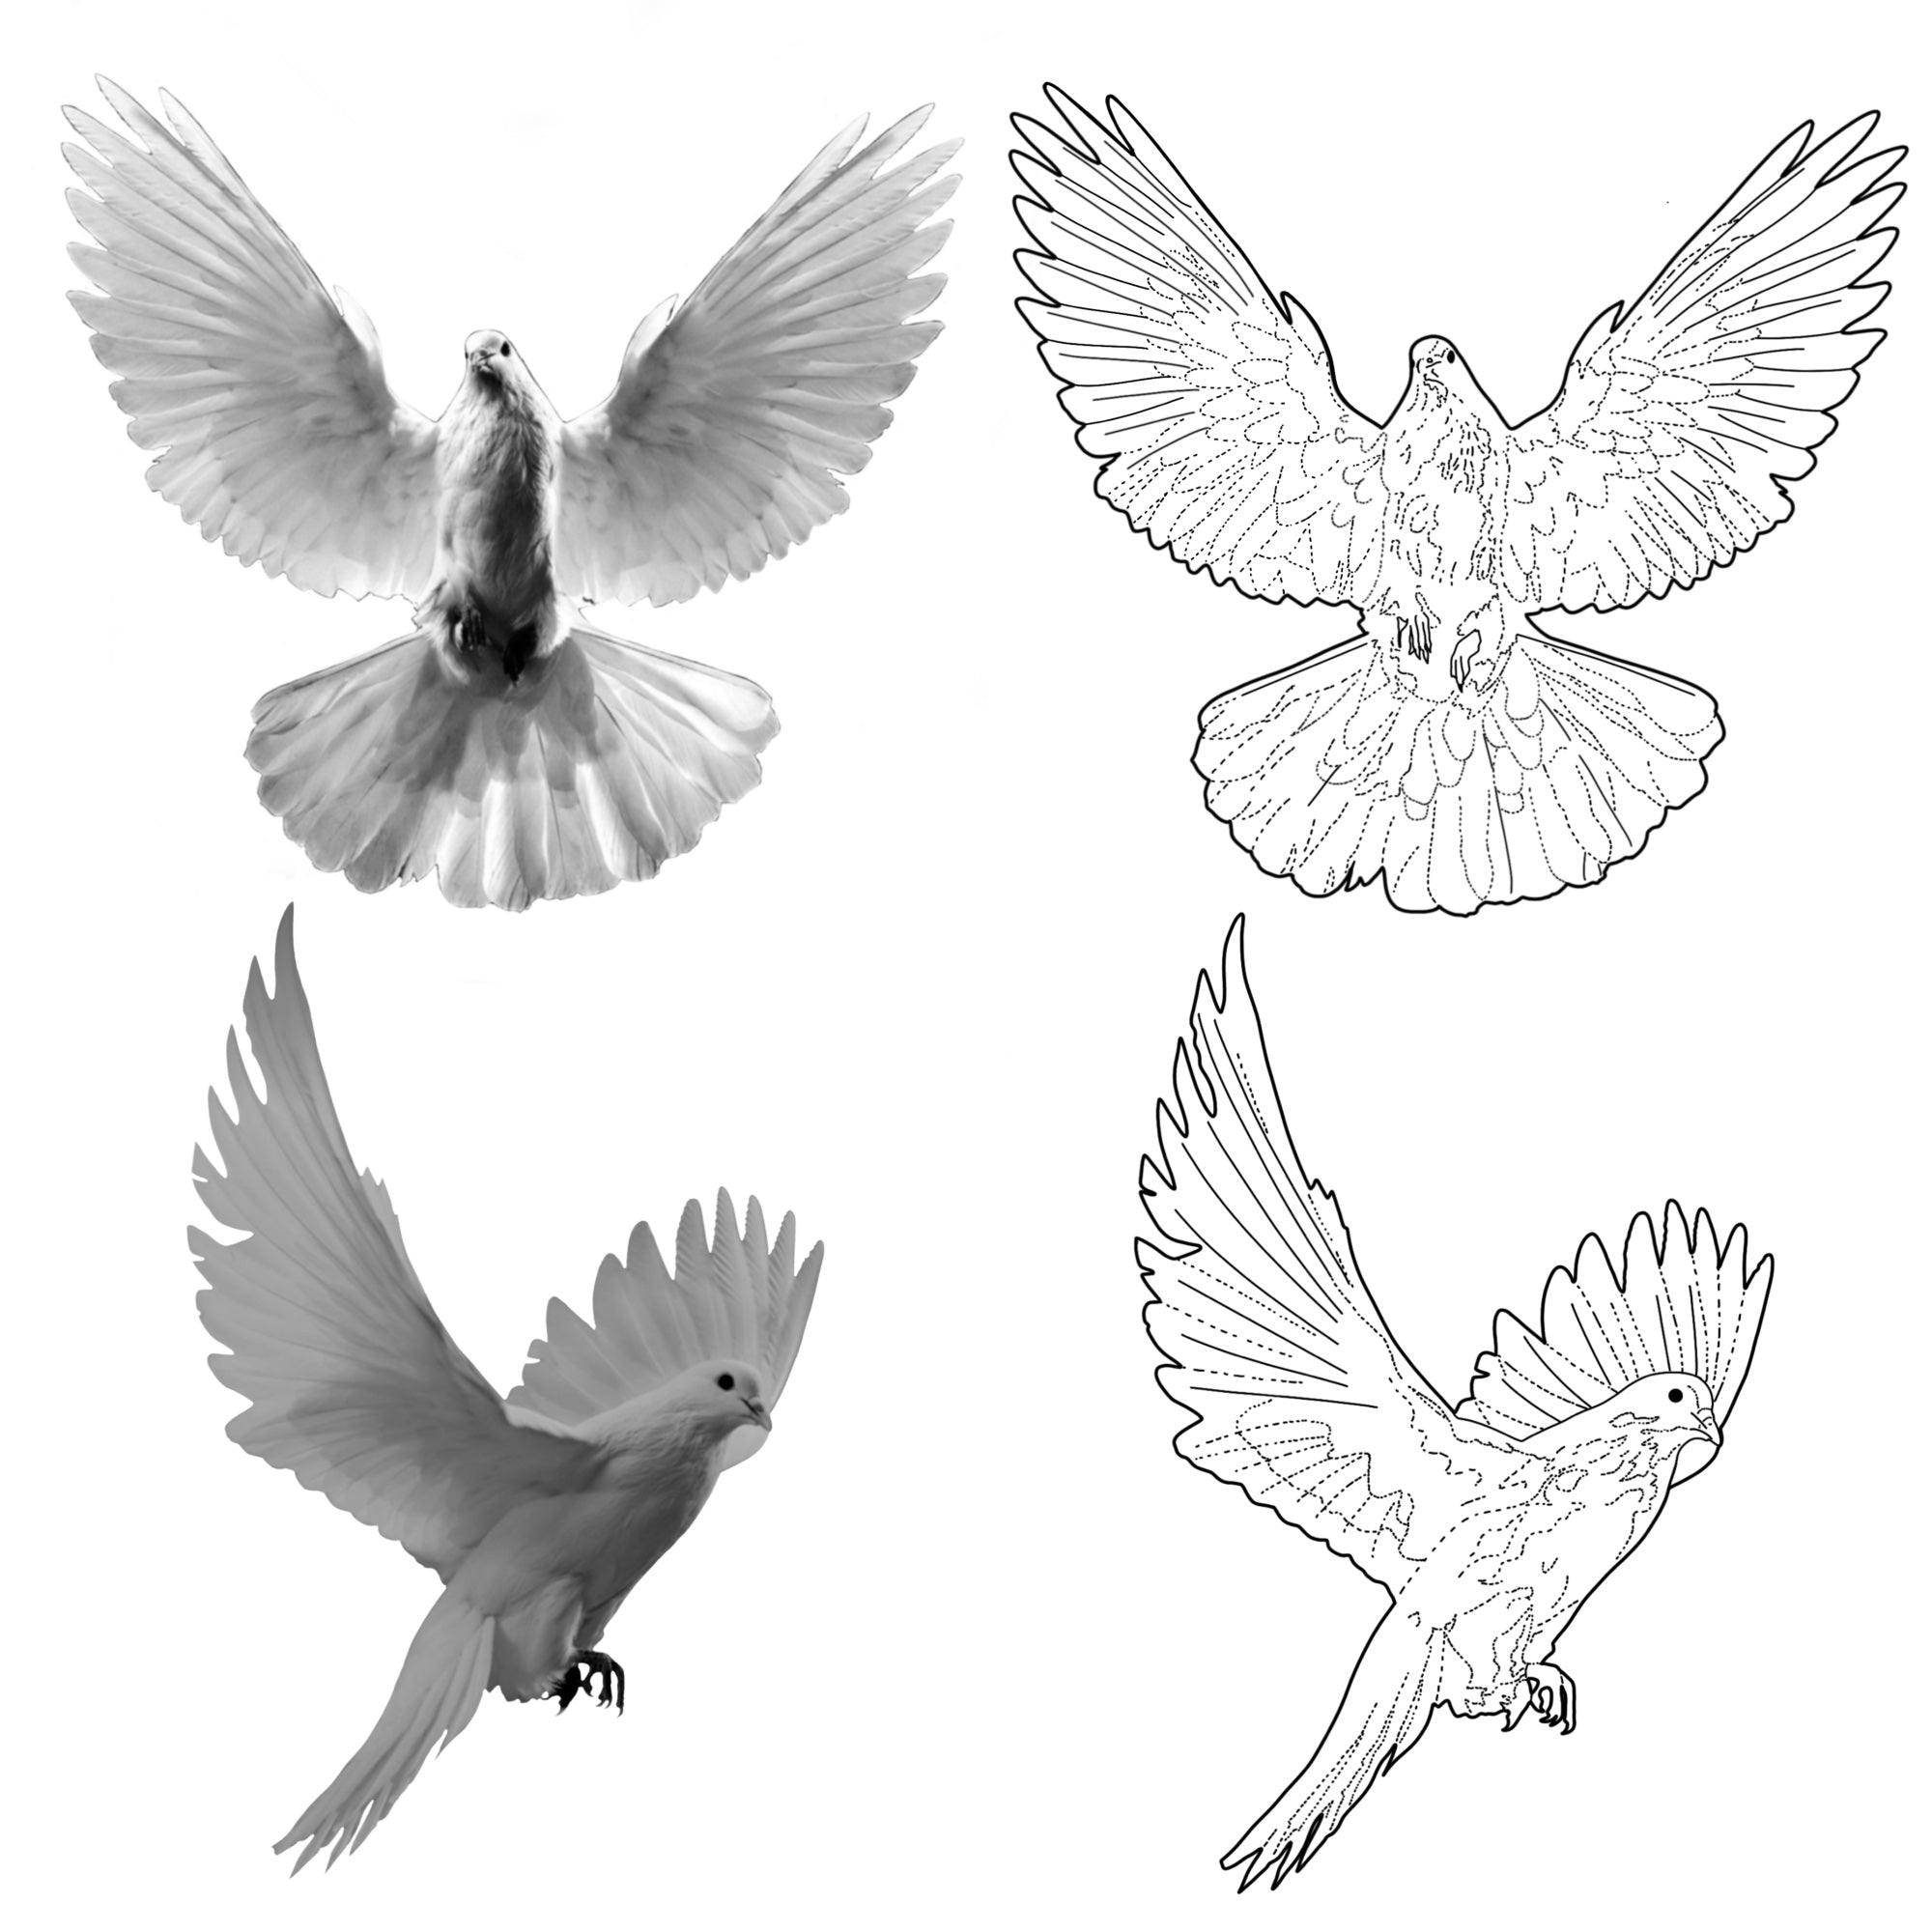 17008 Doves Tattoo Images Stock Photos  Vectors  Shutterstock